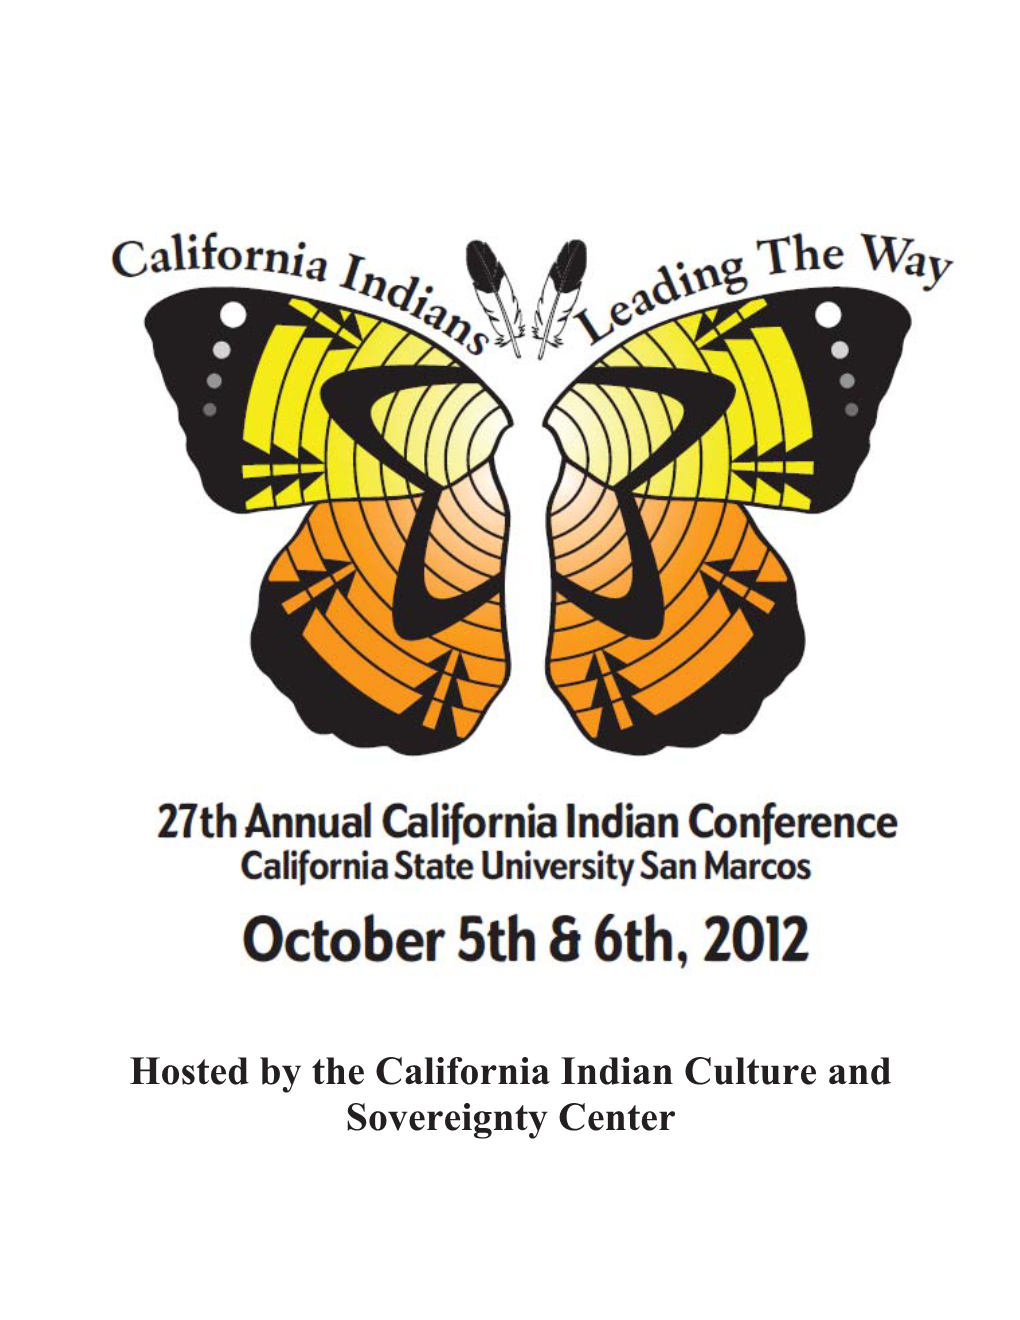 Hosted by the California Indian Culture and Sovereignty Center